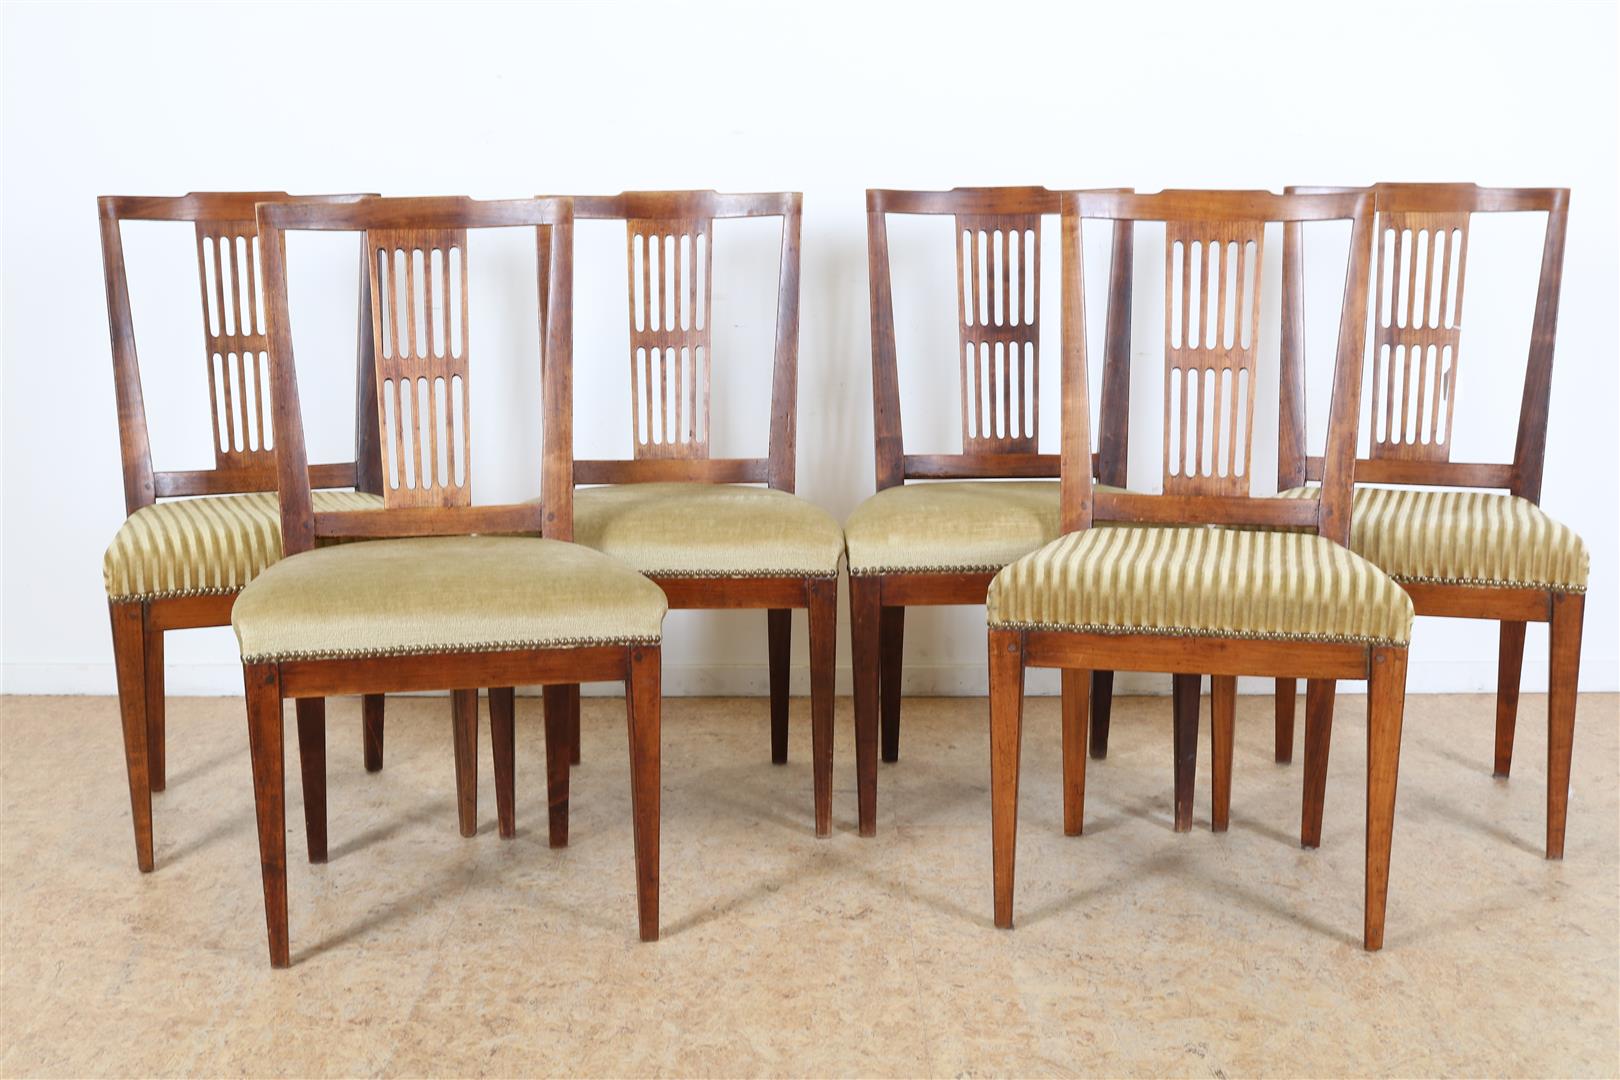 Series of 6 elm wood chairs with elaborate backrest and various green velvet seats, ca. 1800.